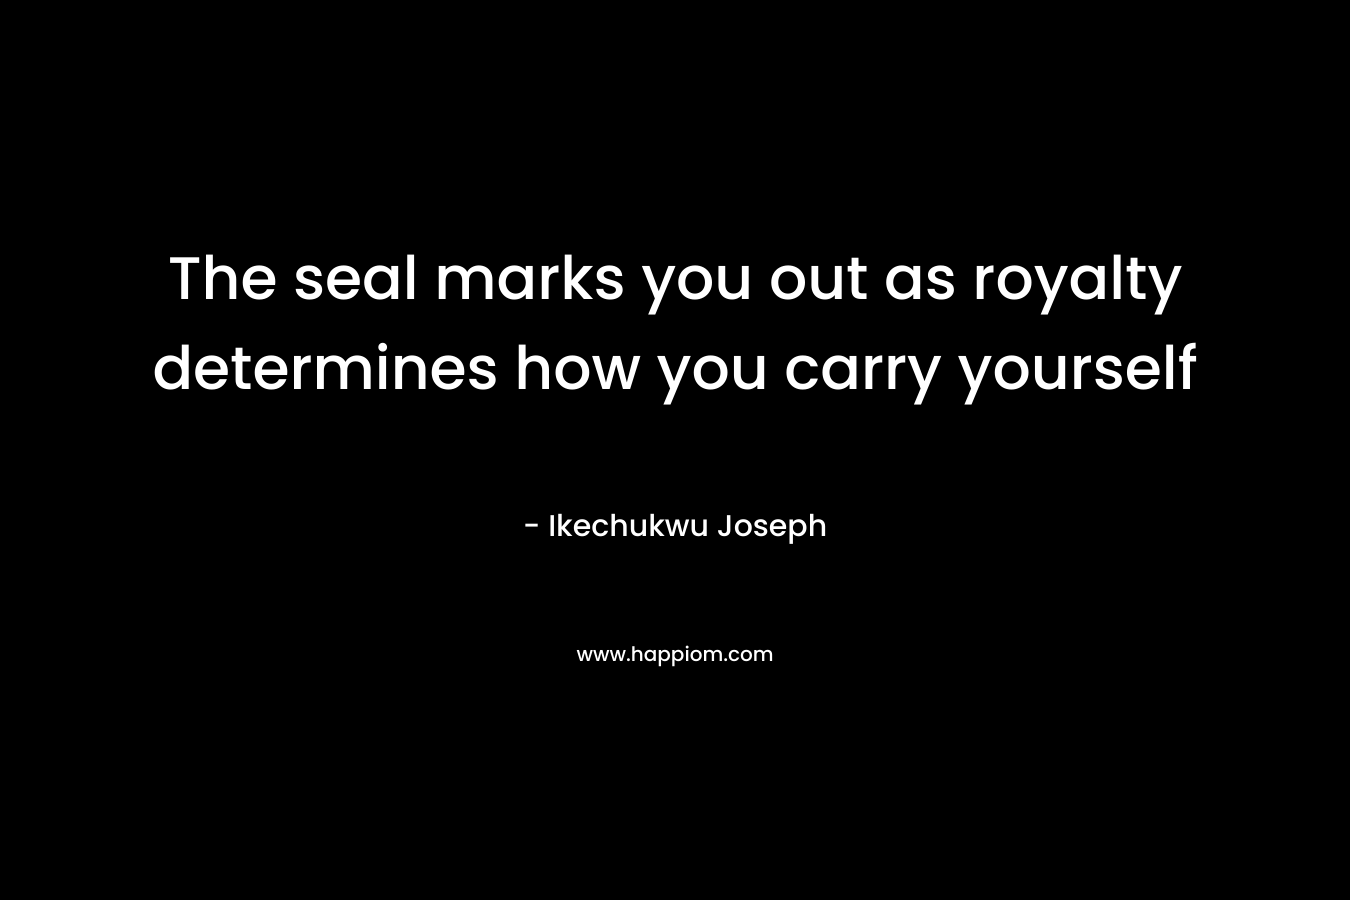 The seal marks you out as royalty determines how you carry yourself – Ikechukwu Joseph